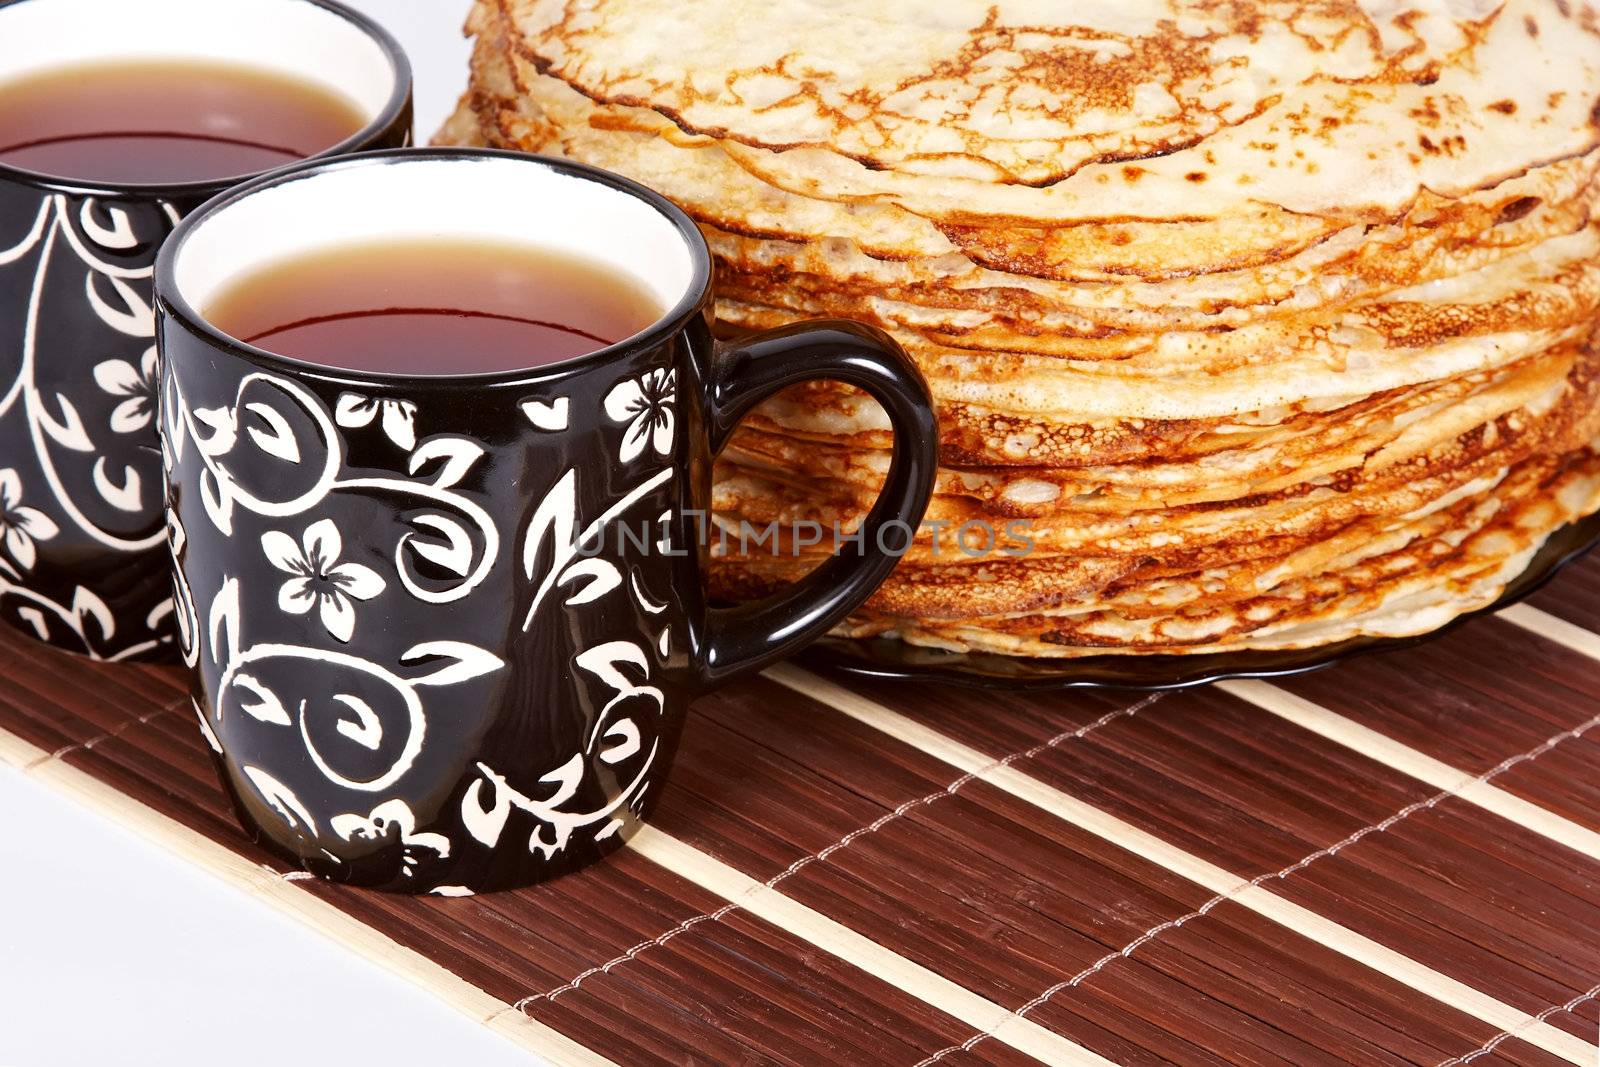 Cups with tea and a pile of pancakes on a plate